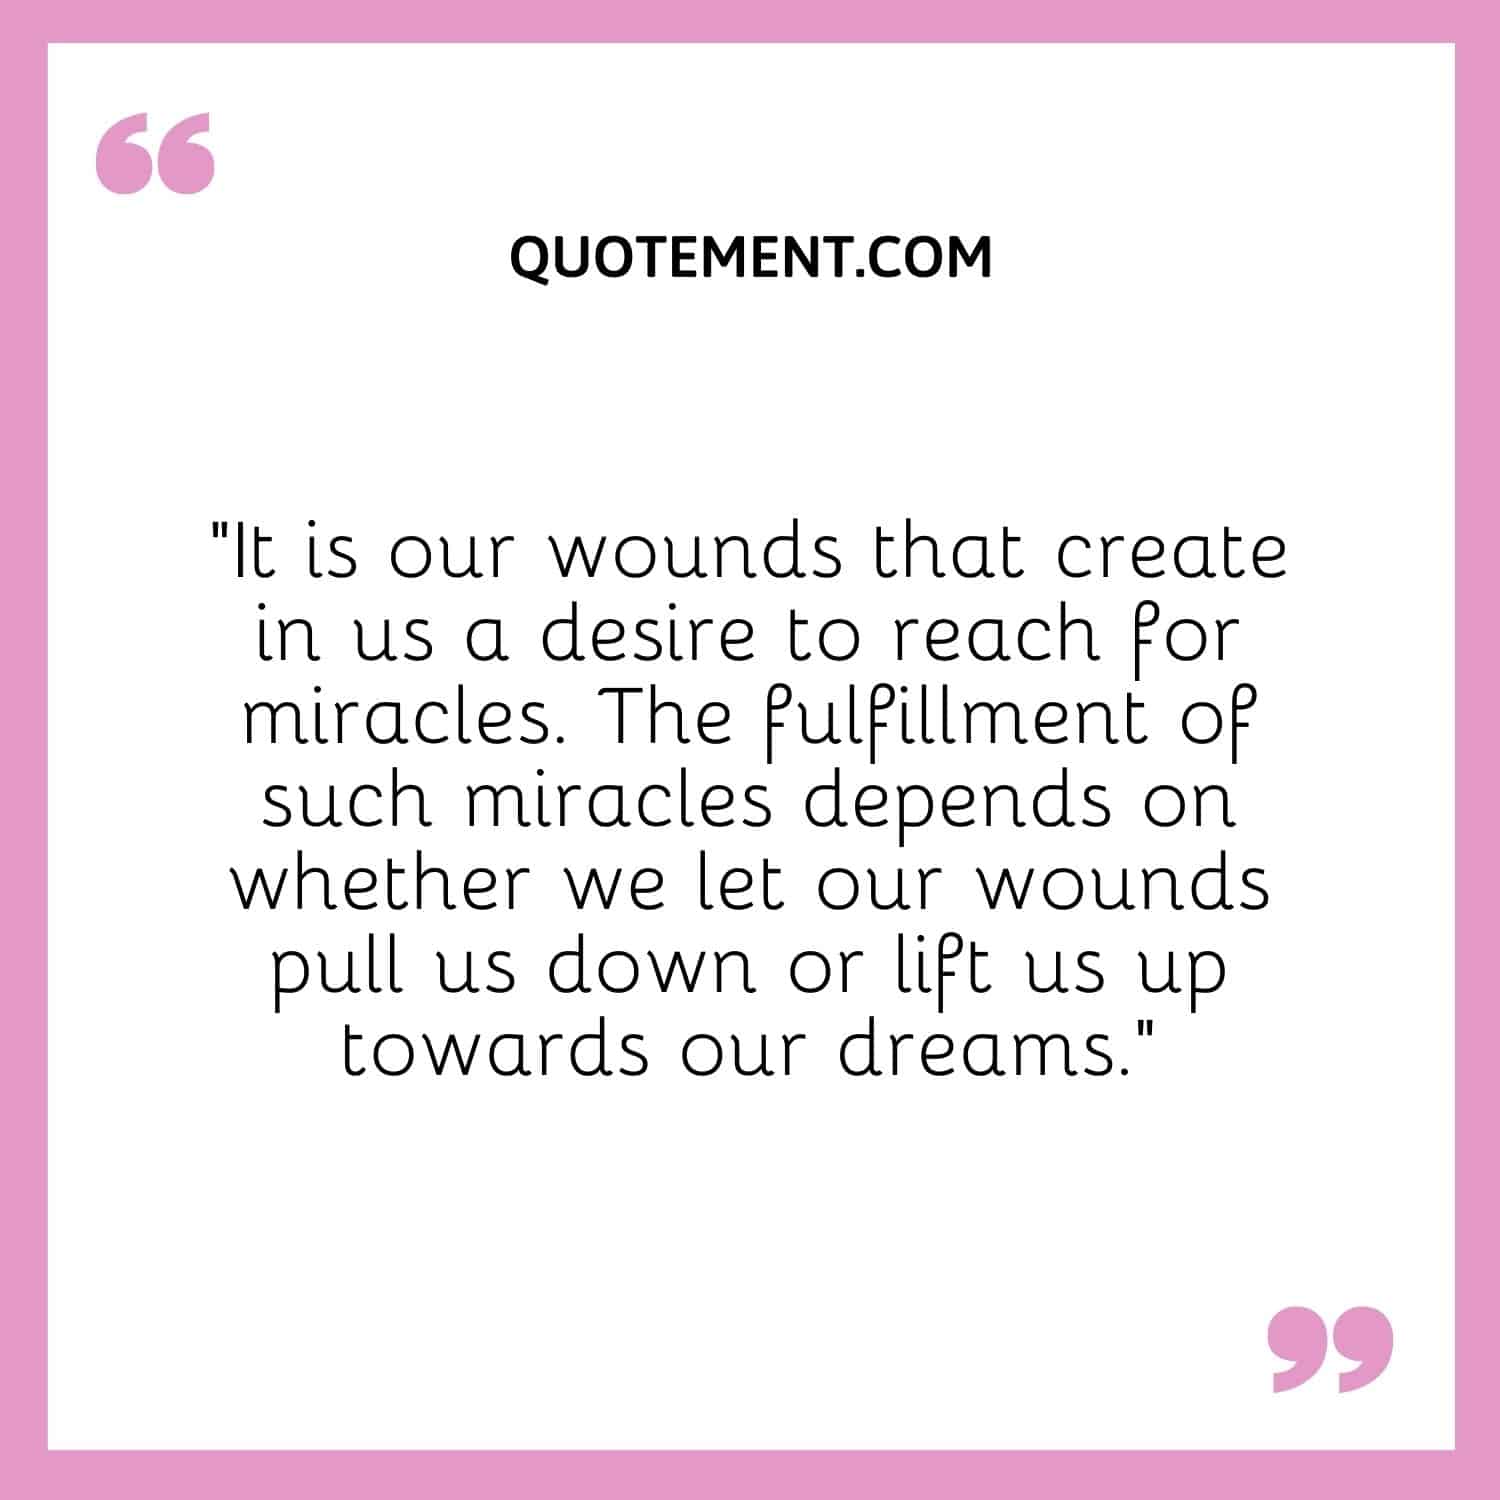 It is our wounds that create in us a desire to reach for miracles